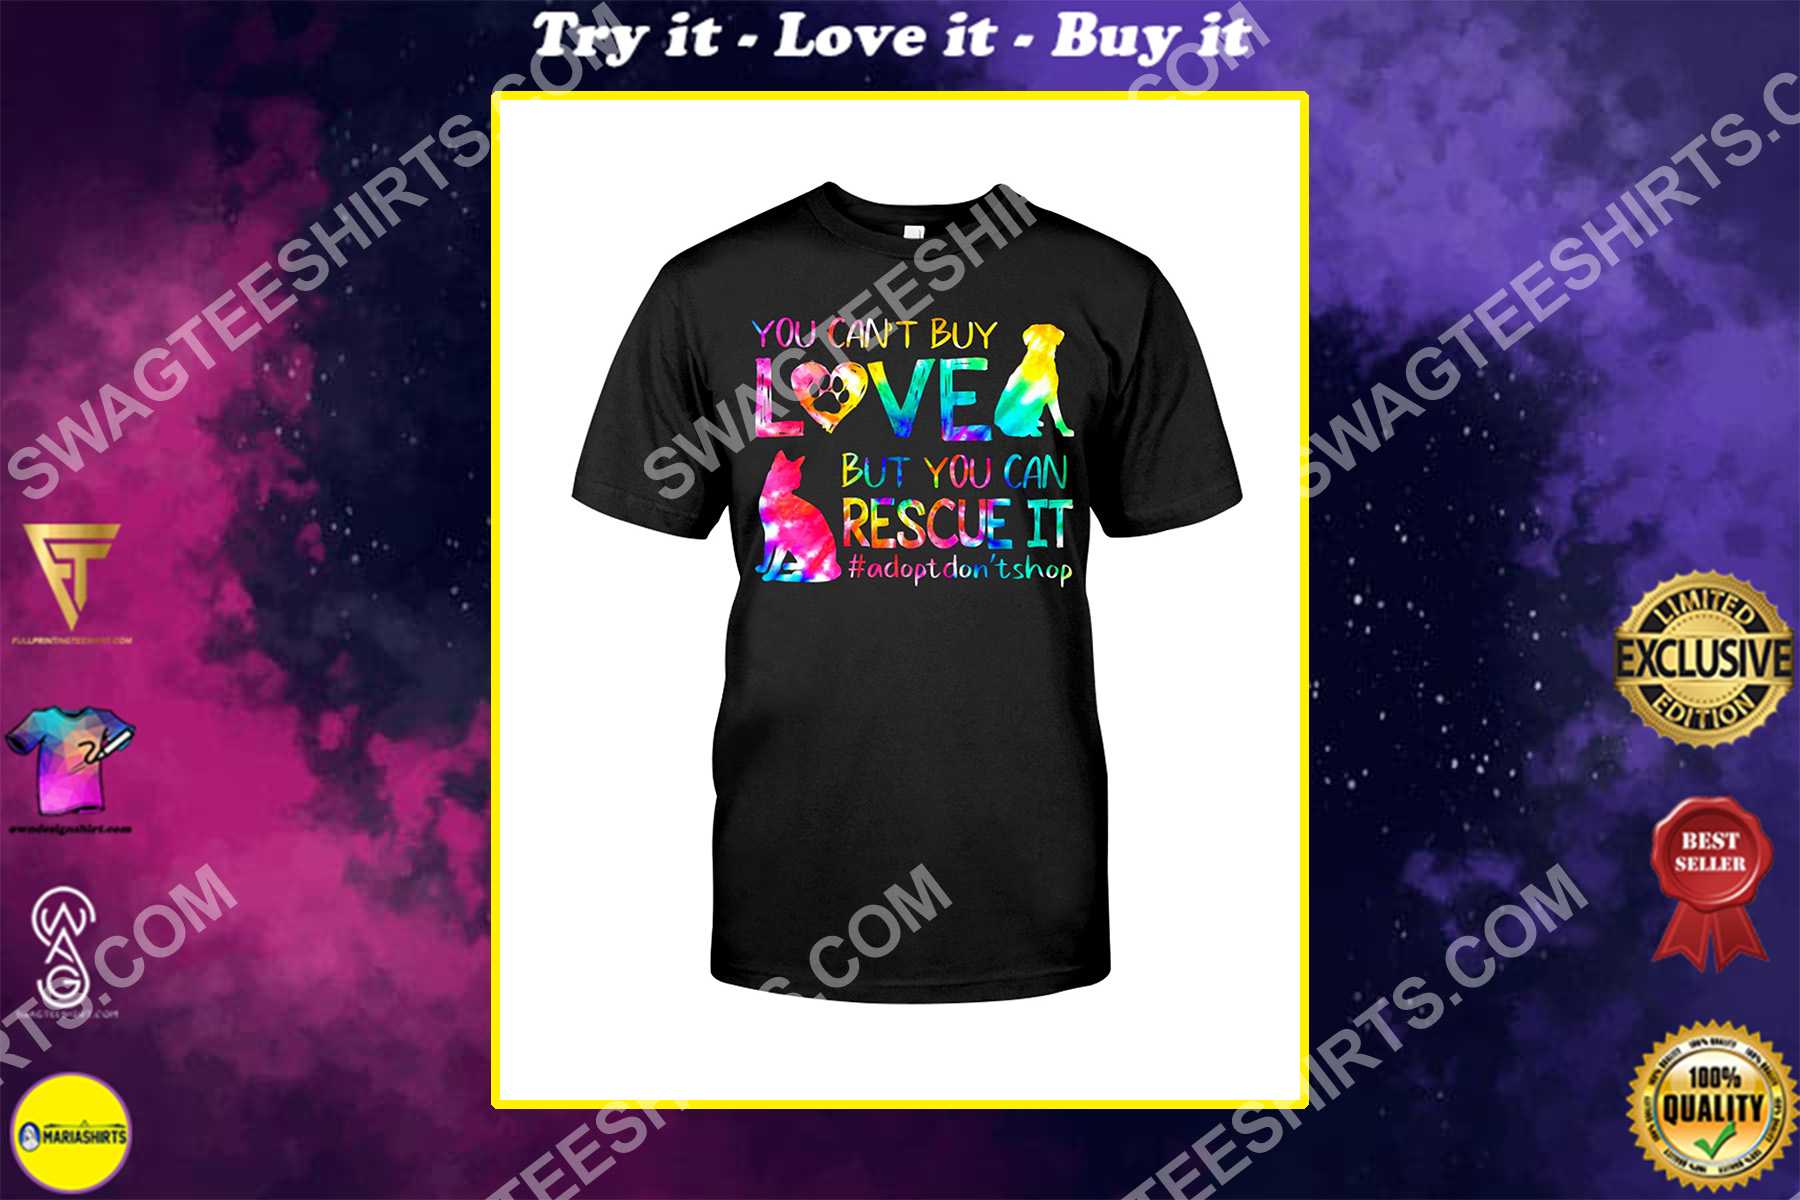 you can't buy love but you can rescue it shirt